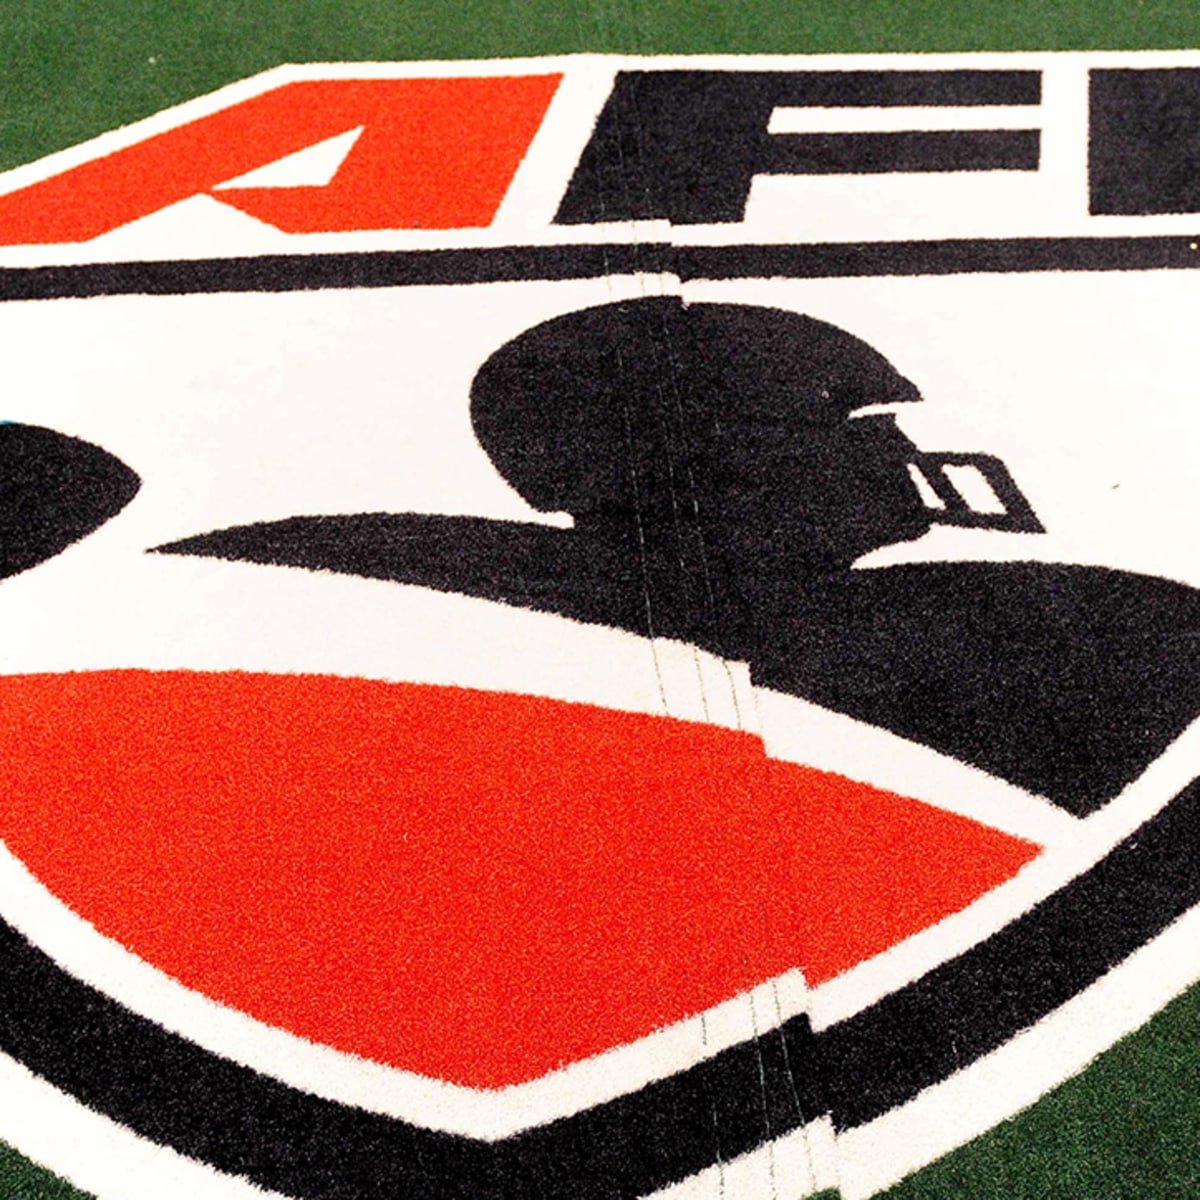 Arena Football League Relaunches With First Black Commissioner of